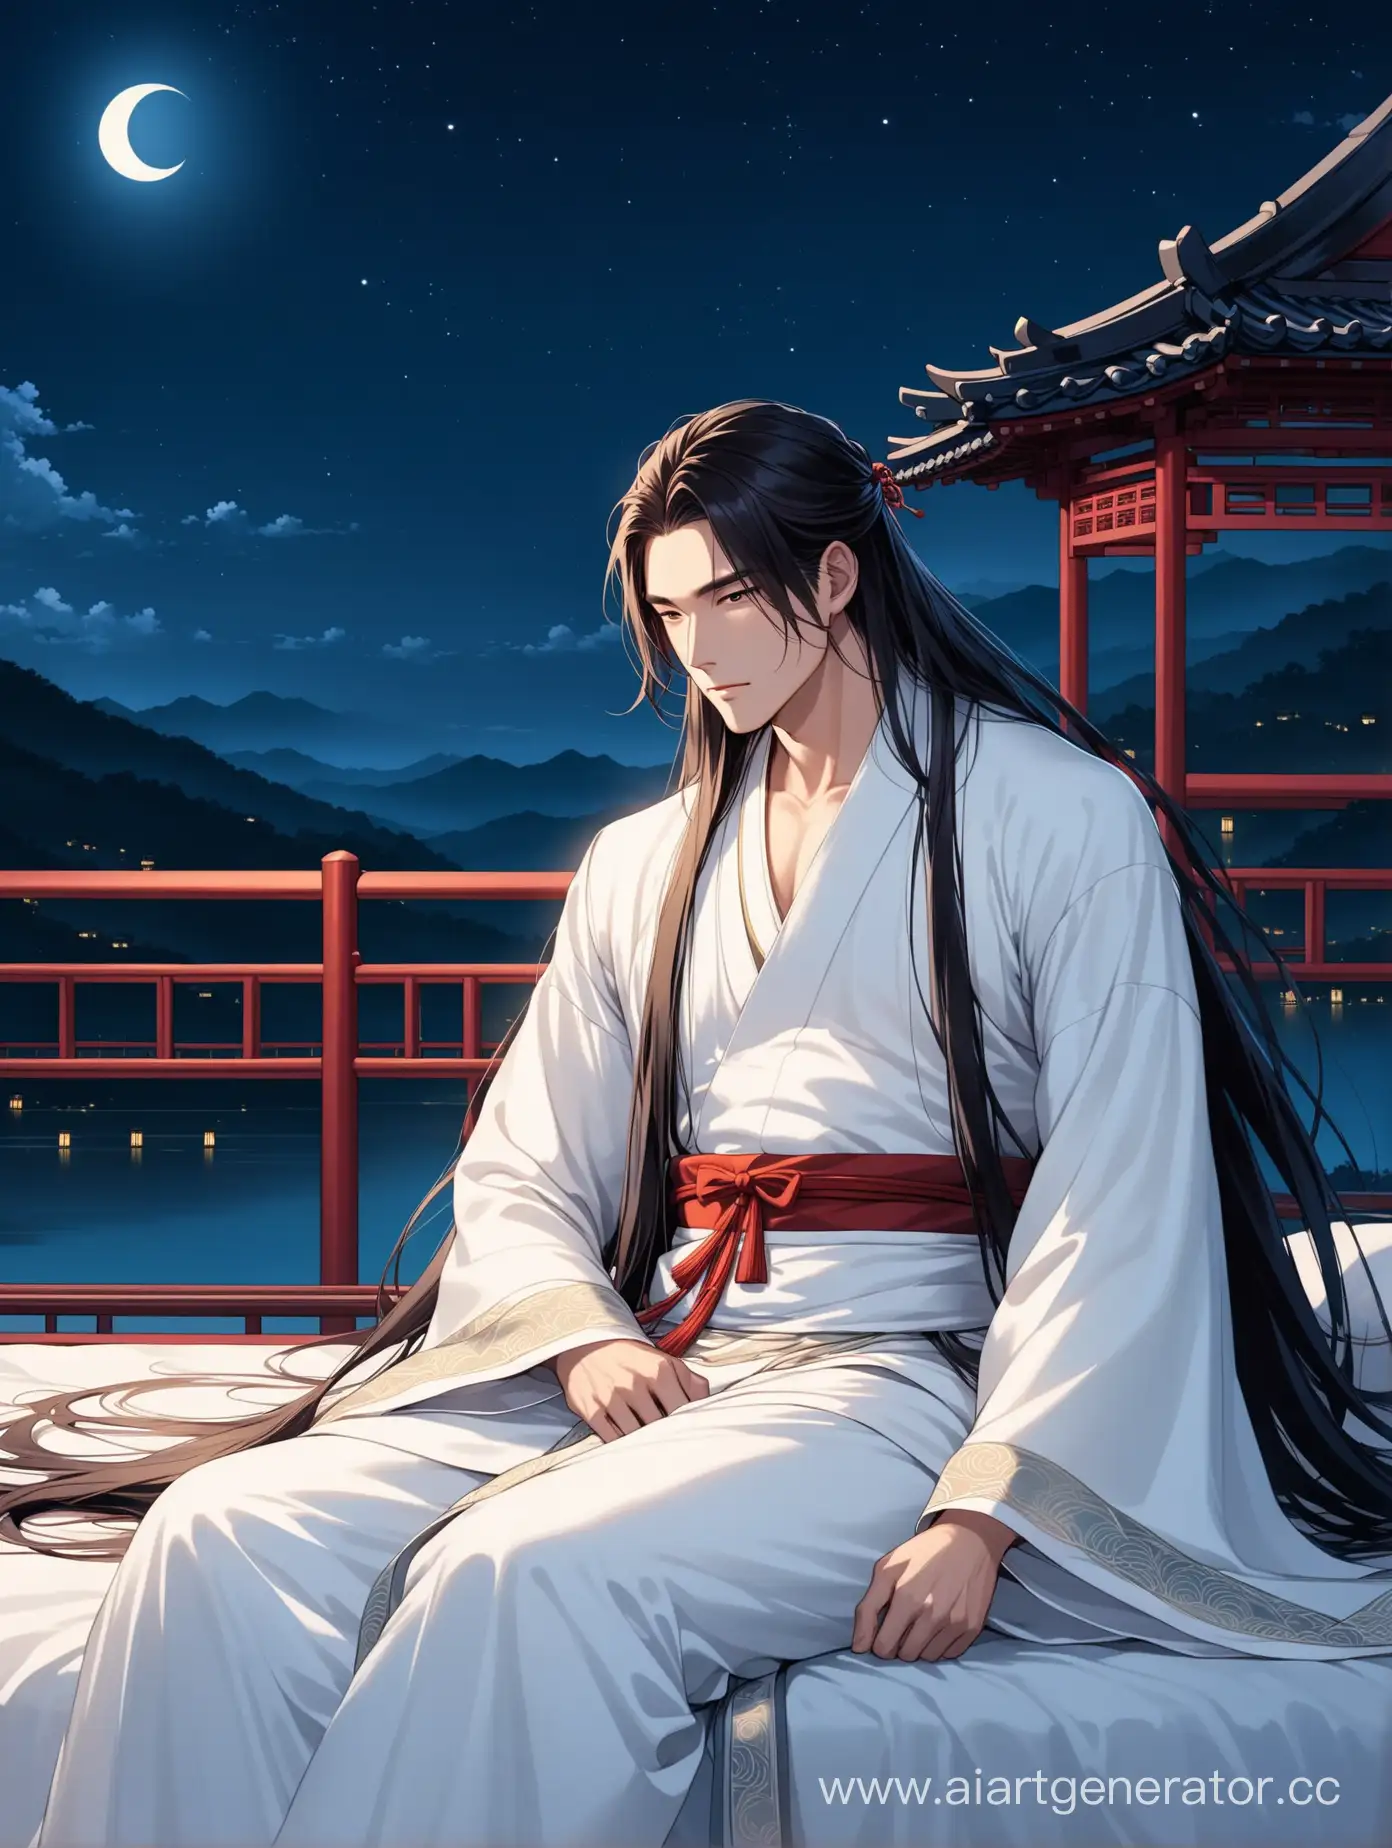 Graceful men sit and look how guy lying on bed, with long thick hair, white hanfu, noble appearance, night landscape